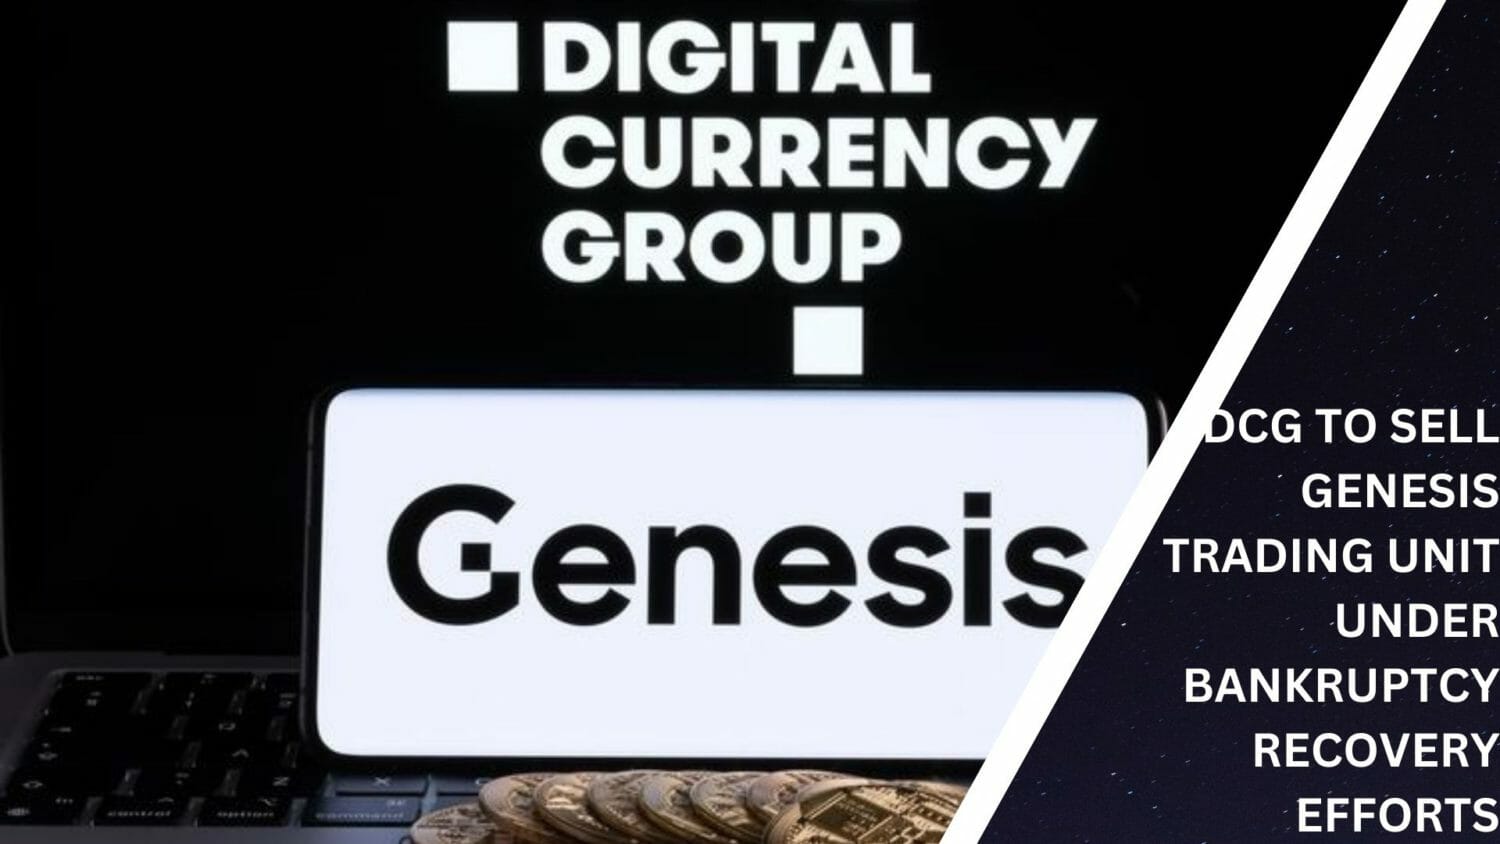 Dcg To Sell Genesis Trading Unit Under Bankruptcy Recovery Efforts